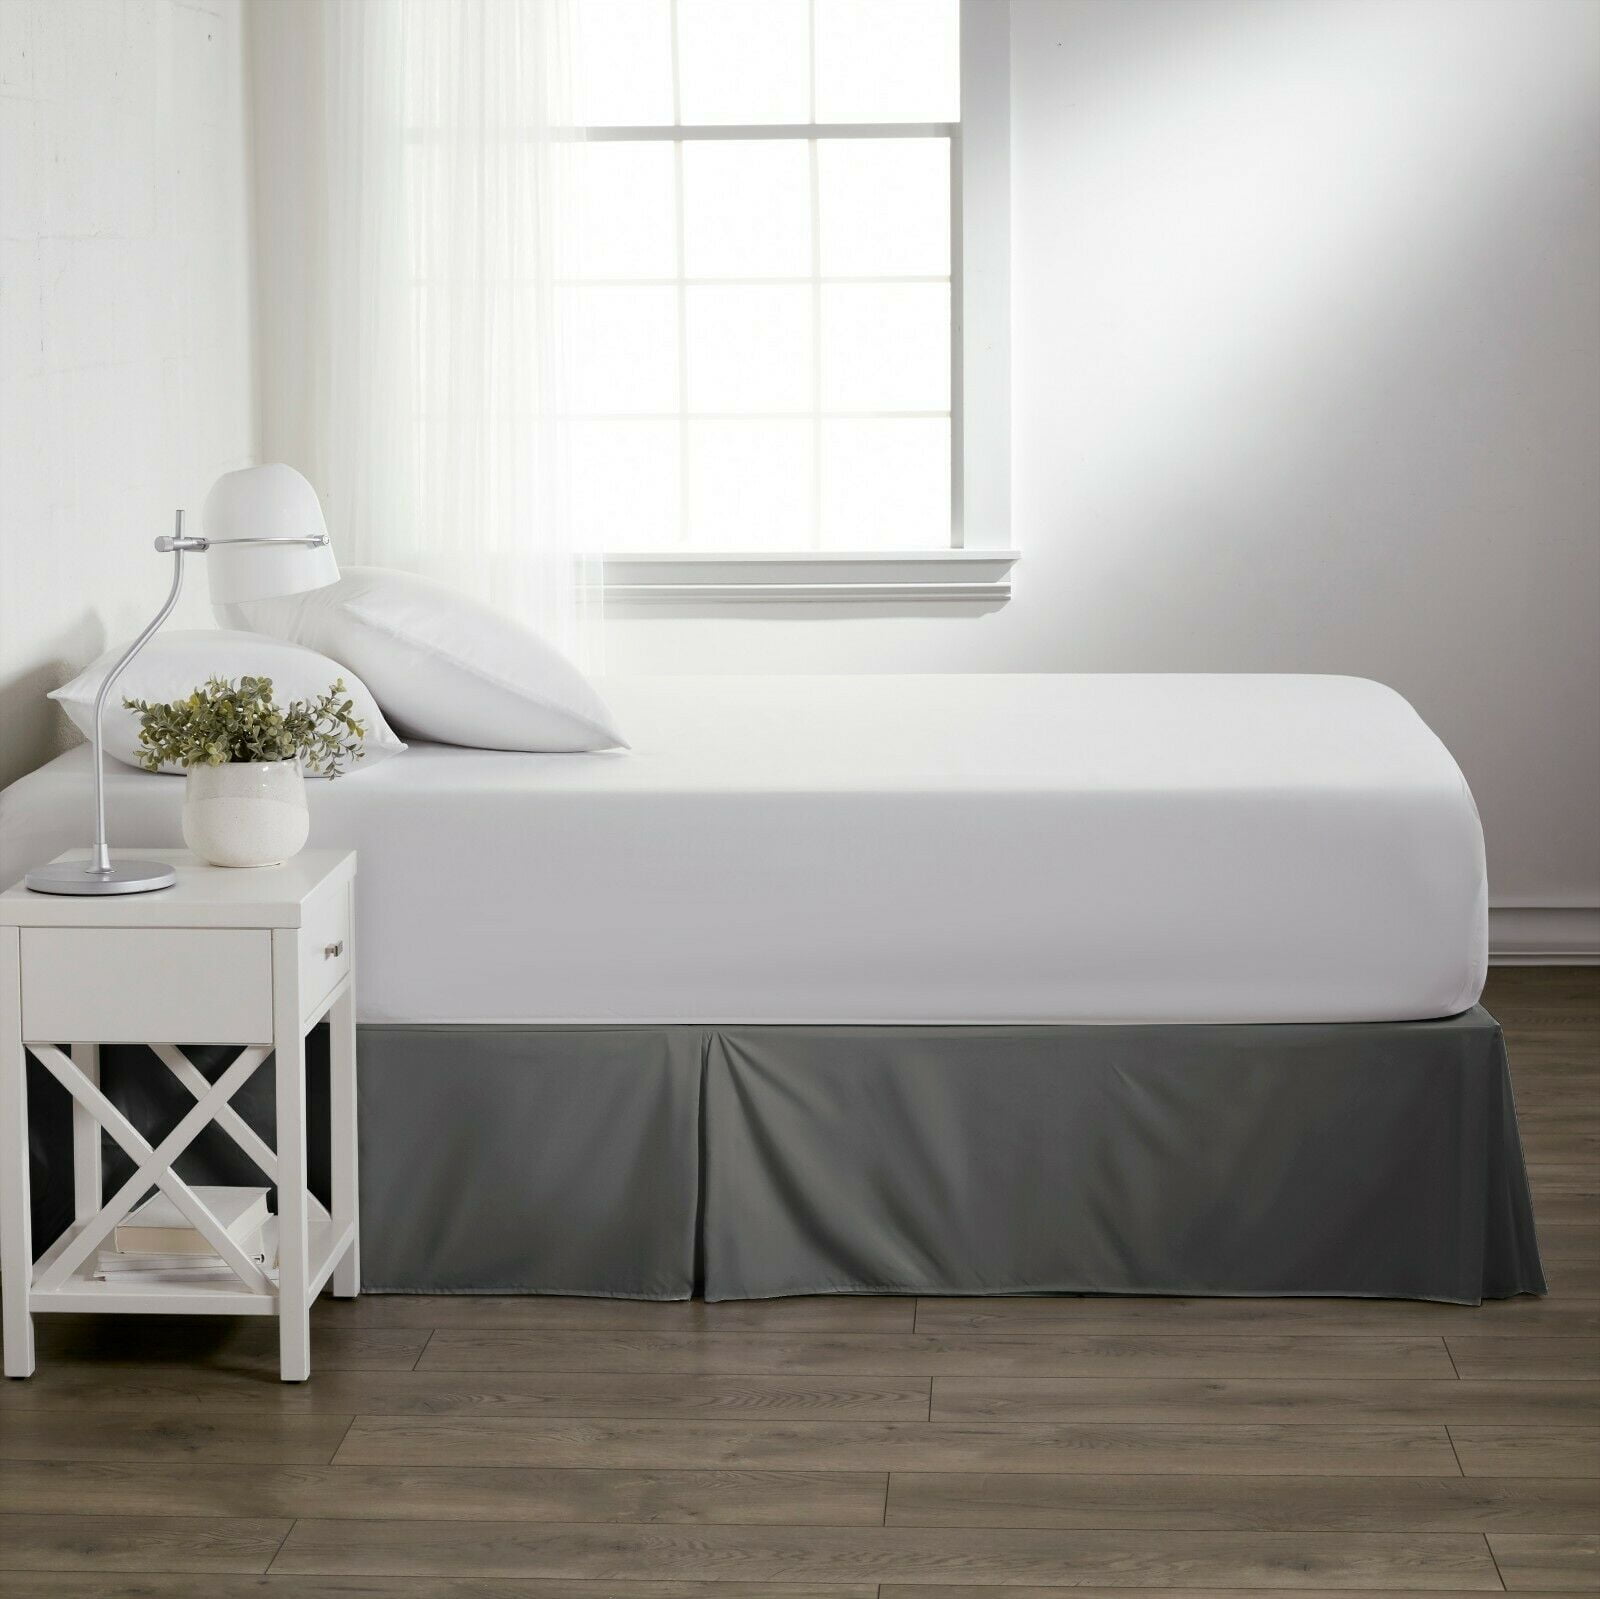 How to attach bed skirt to Leirvik bed